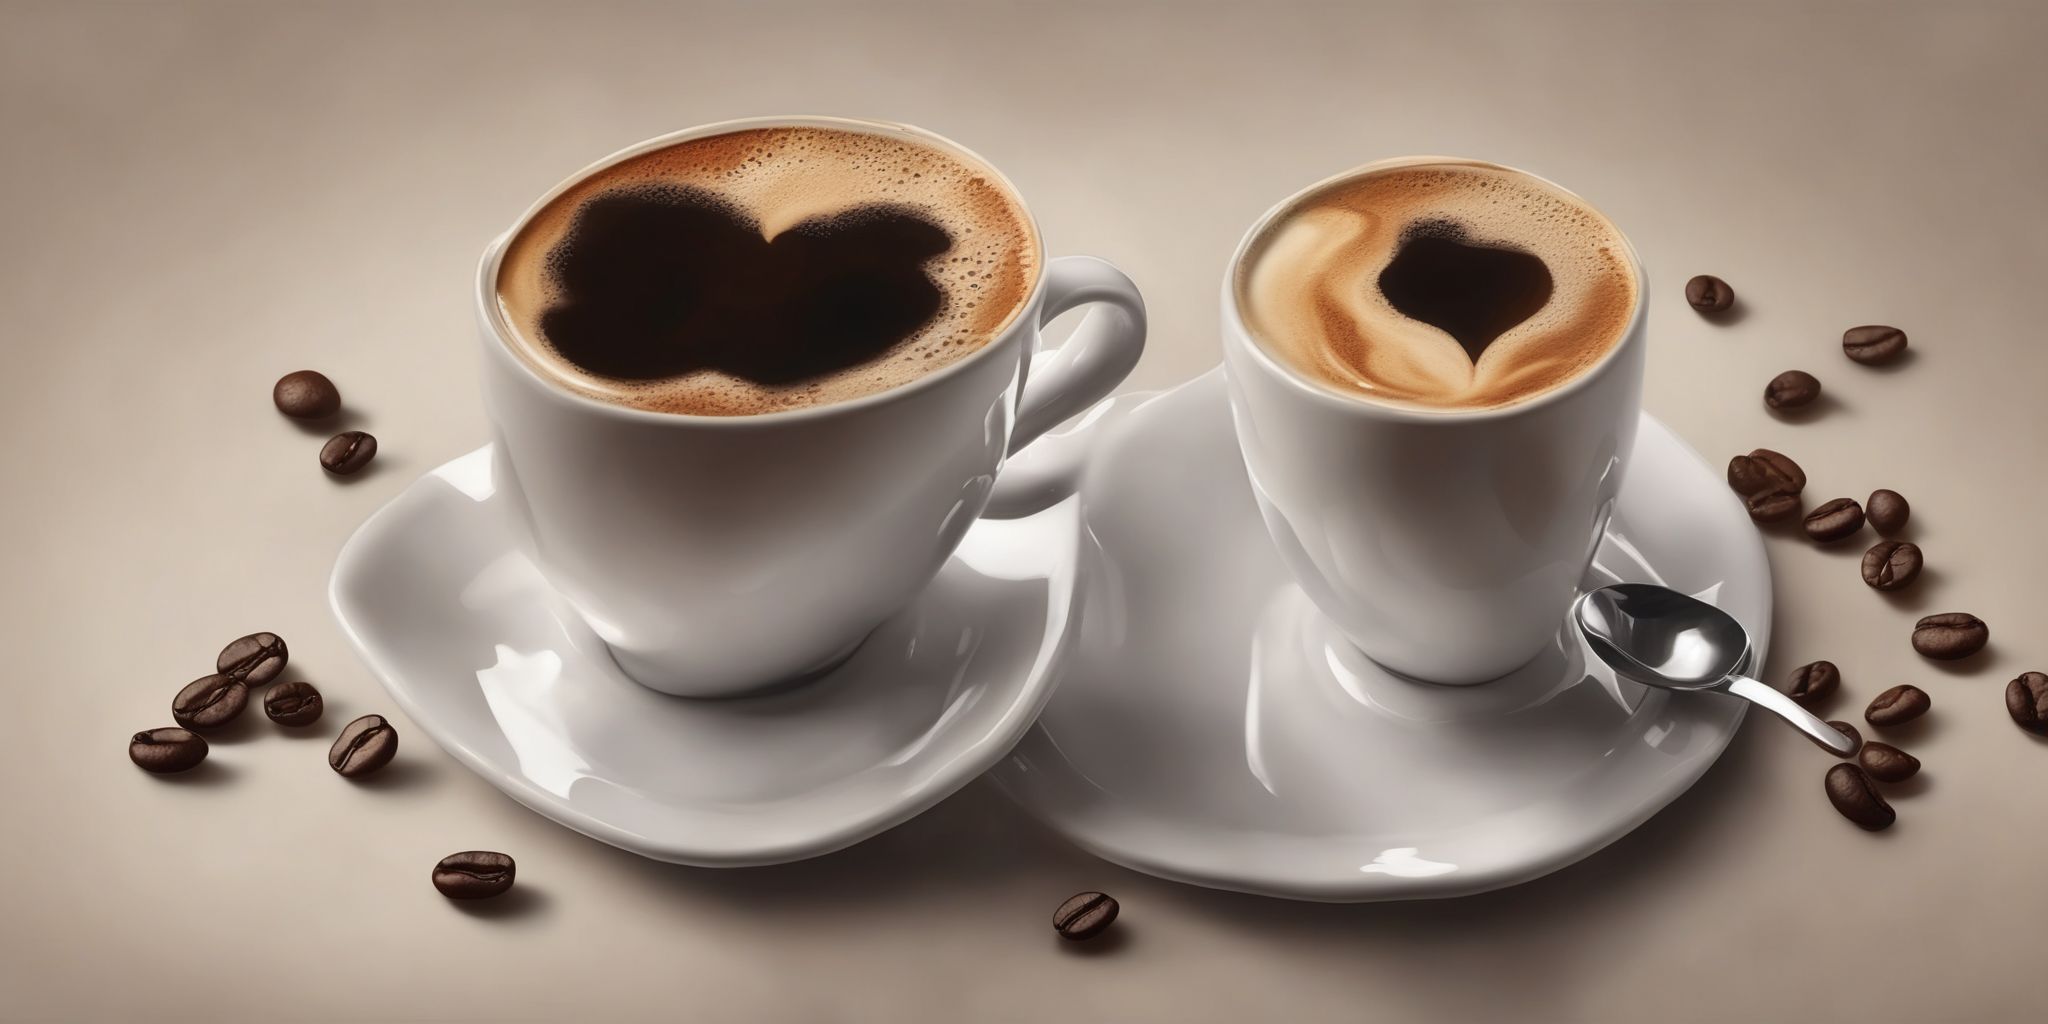 Coffee  in realistic, photographic style